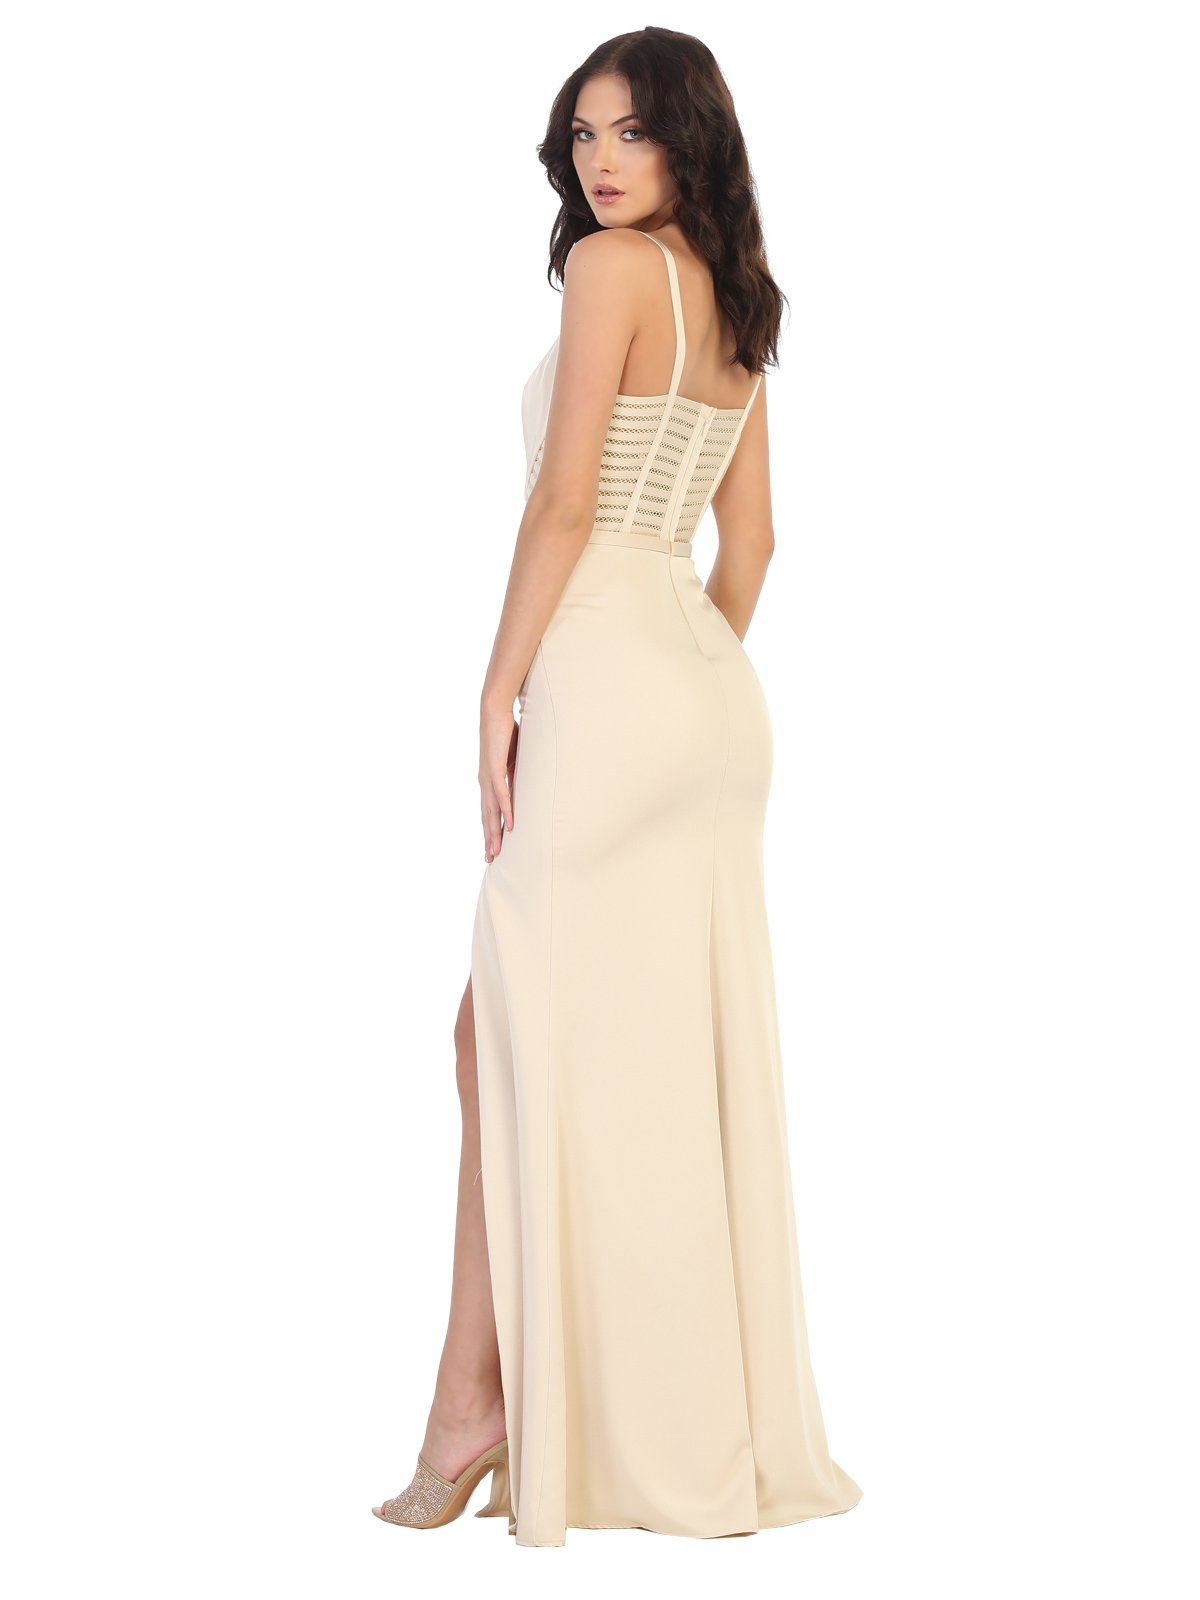 May Queen - MQ1708 Sleeveless Stripe Inset High Slit Dress In Neutral